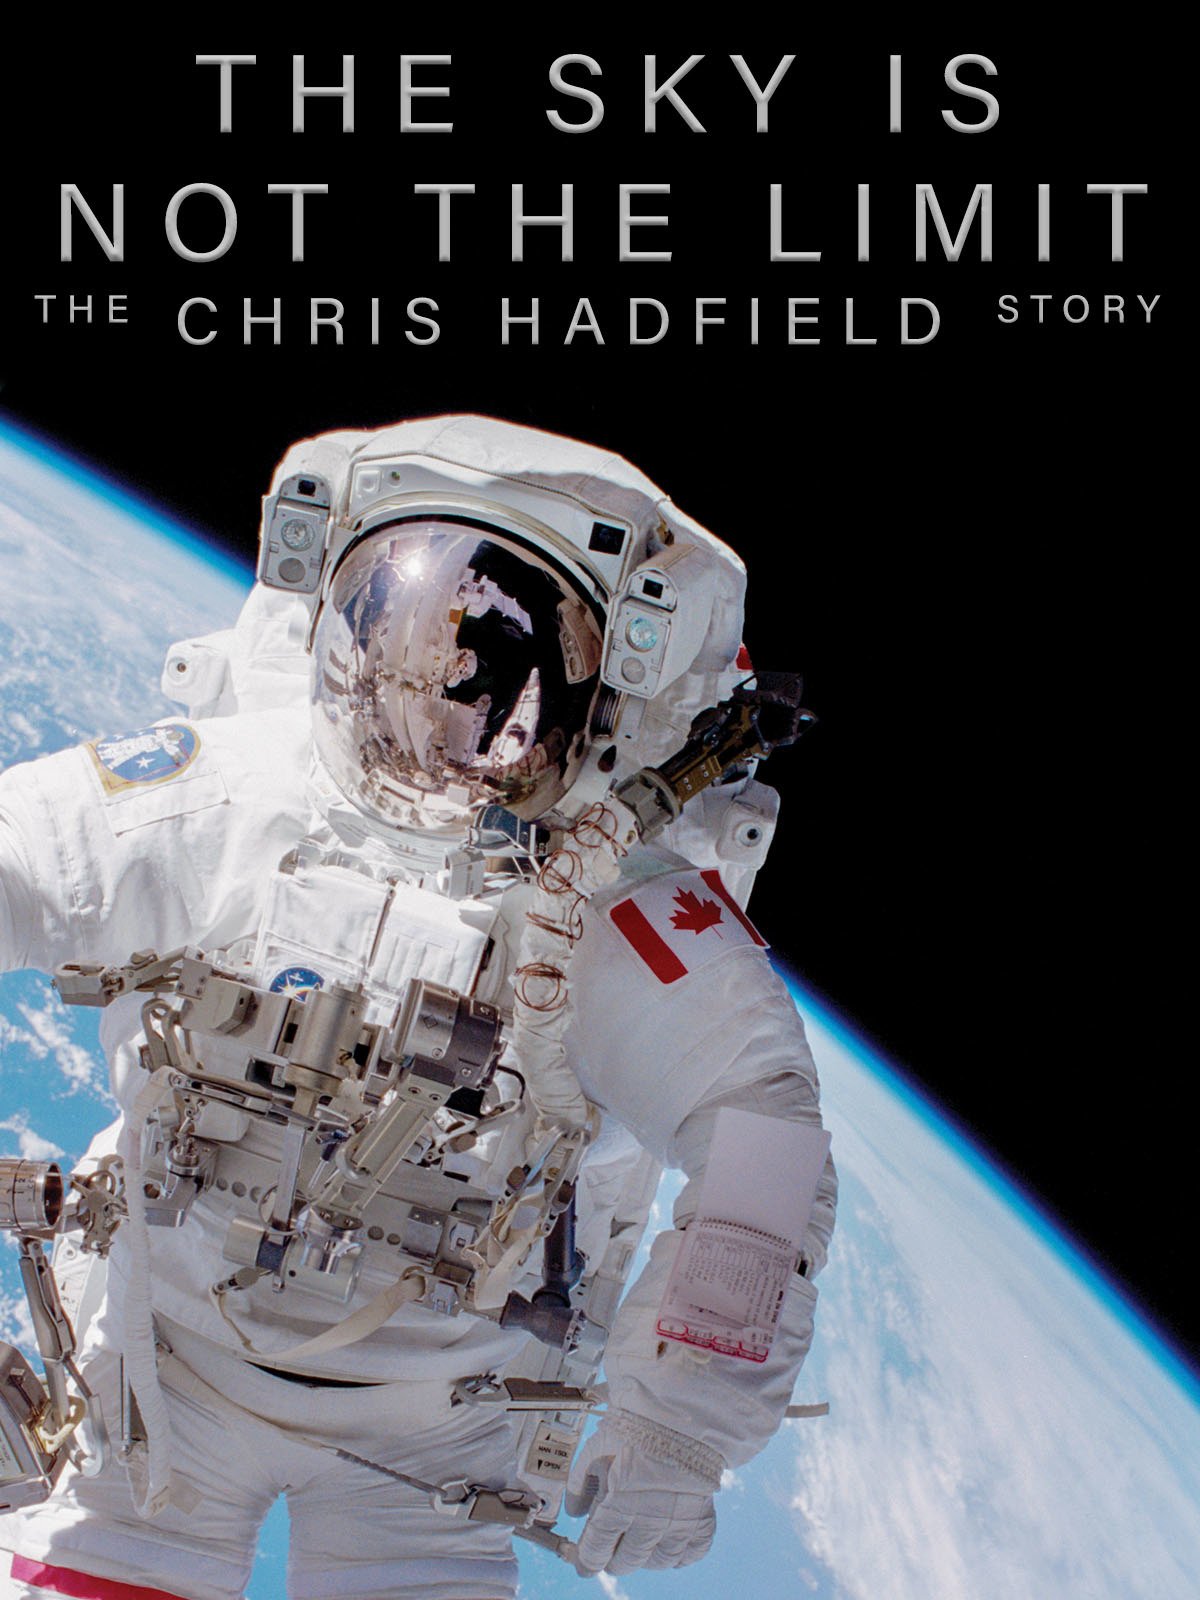 THE SKY IS NOT THE LIMIT: THE CHRIS HADFIELD STORY